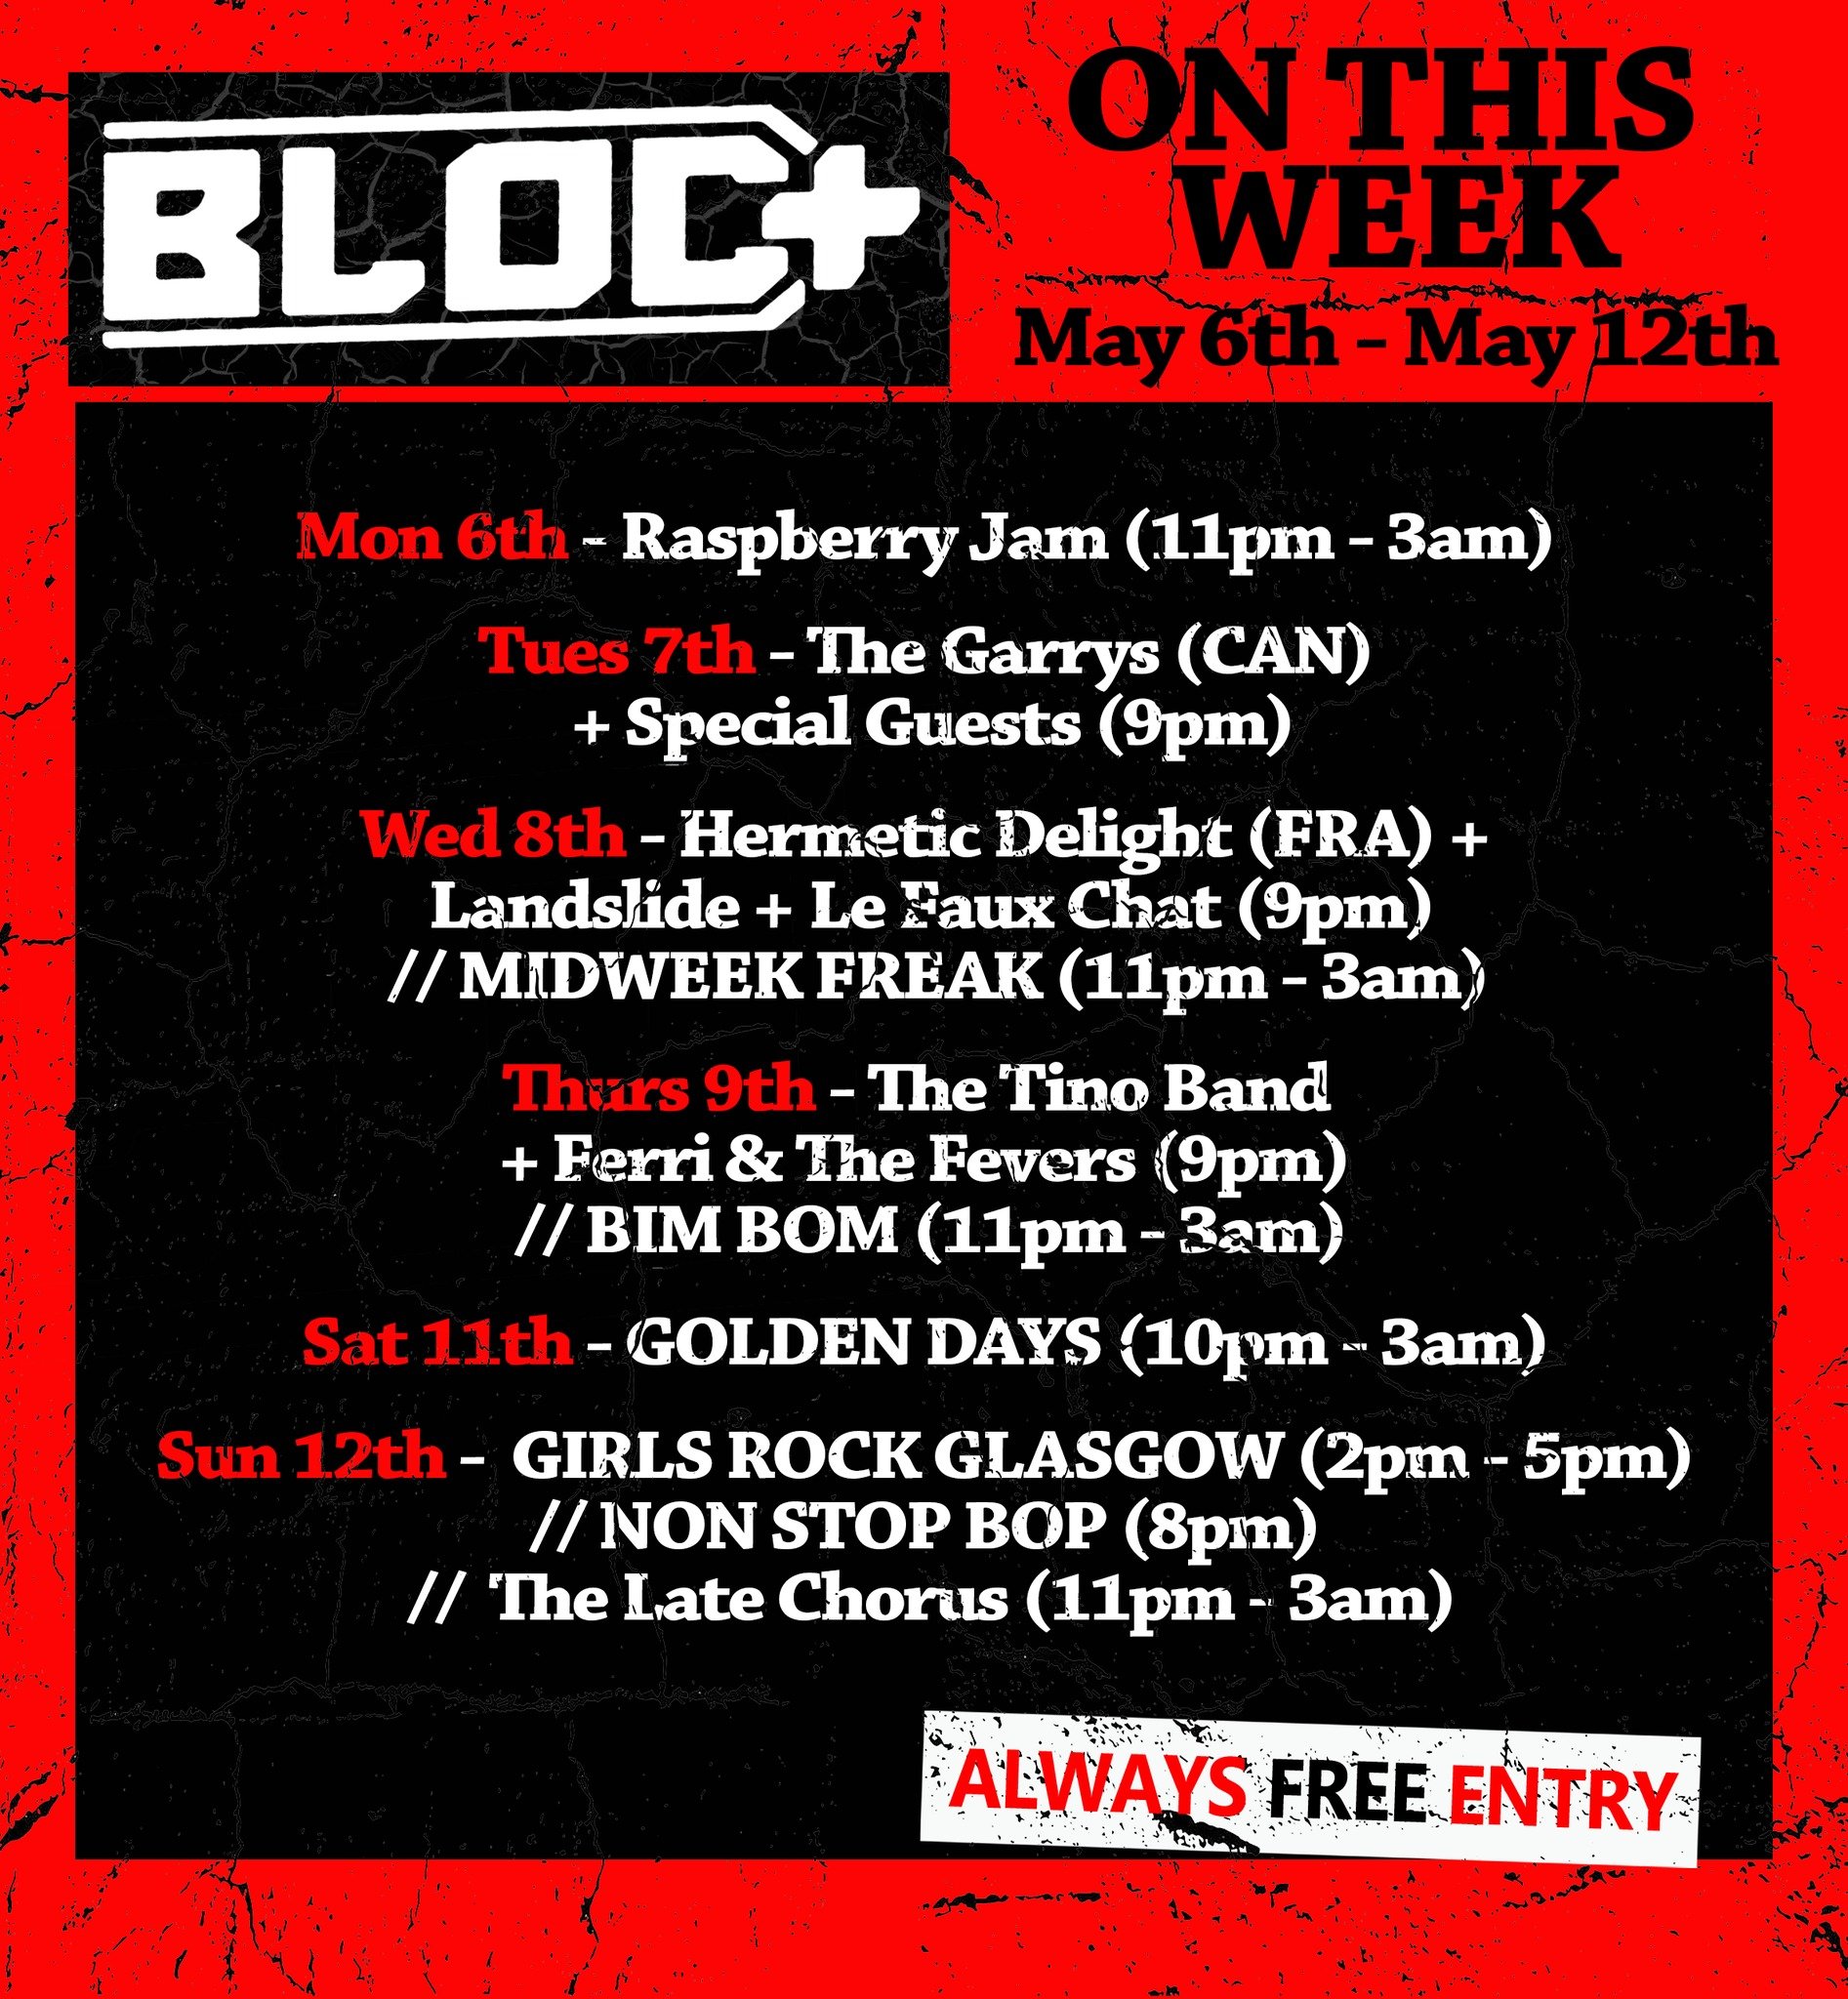 🔥THIS WEEK AT BLOC+🔥

Are you still mapping out your week? 🤔 Check out our awesome lineup of clubs, jams, and gigs featuring both local and international artists. 😎

⏰ OPEN LATE ALL WEEK ⏰
🎟️ ALWAYS FREE ENTRY 🎟️